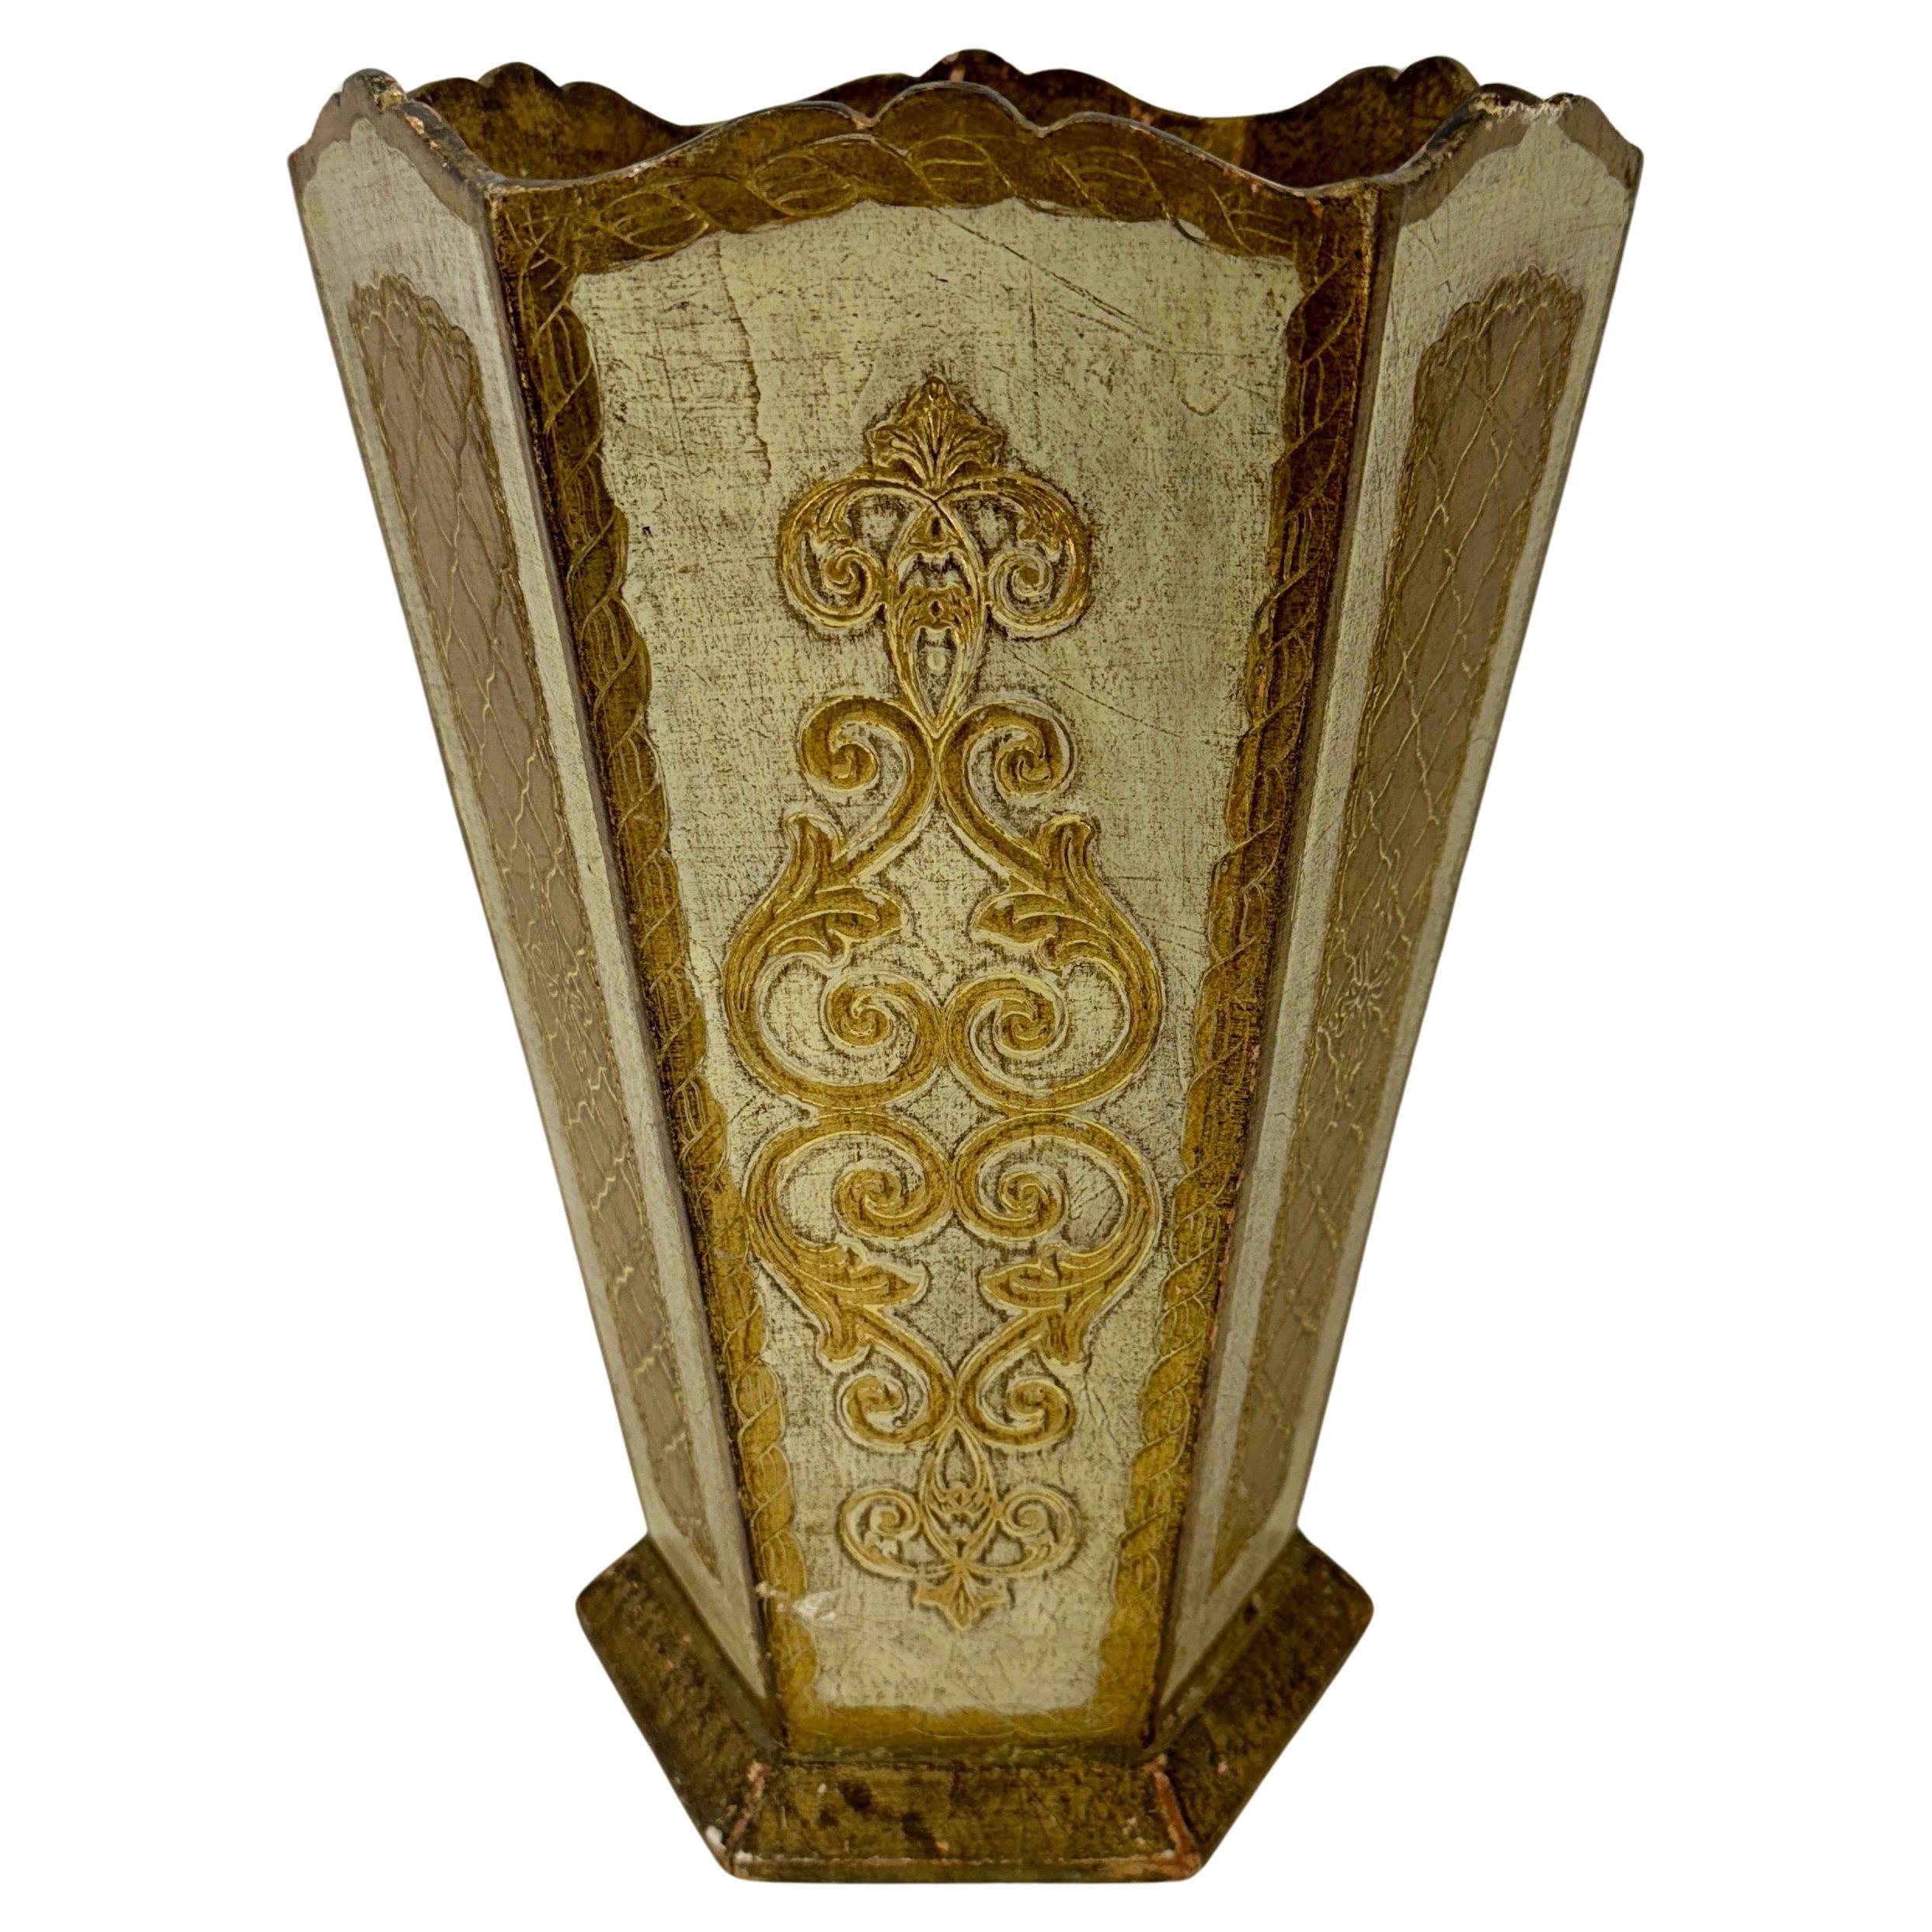 Vintage Italian Florentine Gold and Cream Wooden Wastebasket

Charming tall gilded wastebasket or trash can Made in Italy. Perfect to be used formally or informally in a bathroom, powder room, vanity space or home office. Truly a vintage ornate